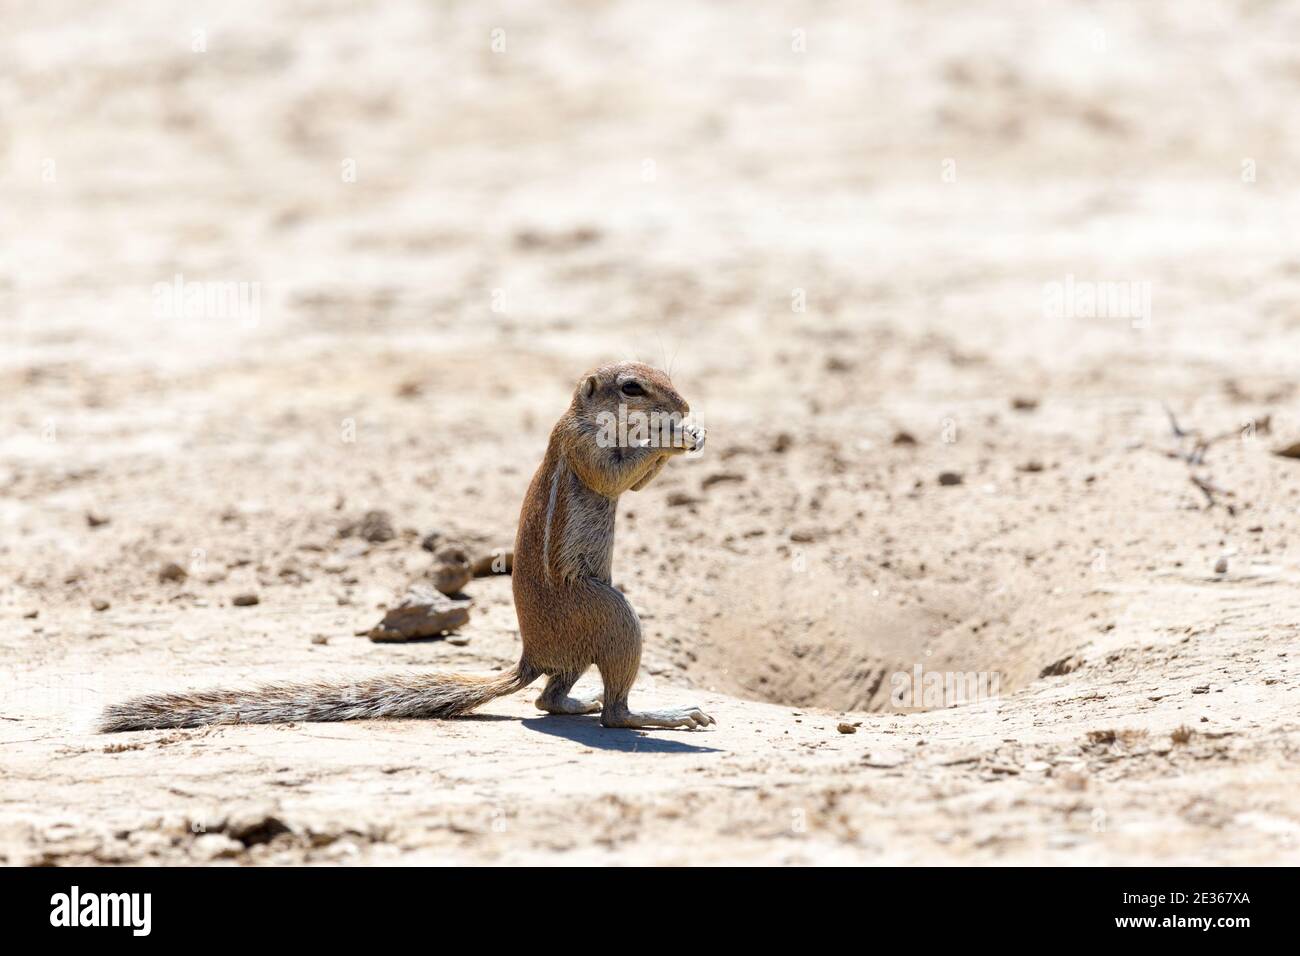 Cape ground squirrel or South African ground squirrel(Xerus inauris) on its own standing up next to its burrow with its paws at its mouth in Kgalagadi Stock Photo